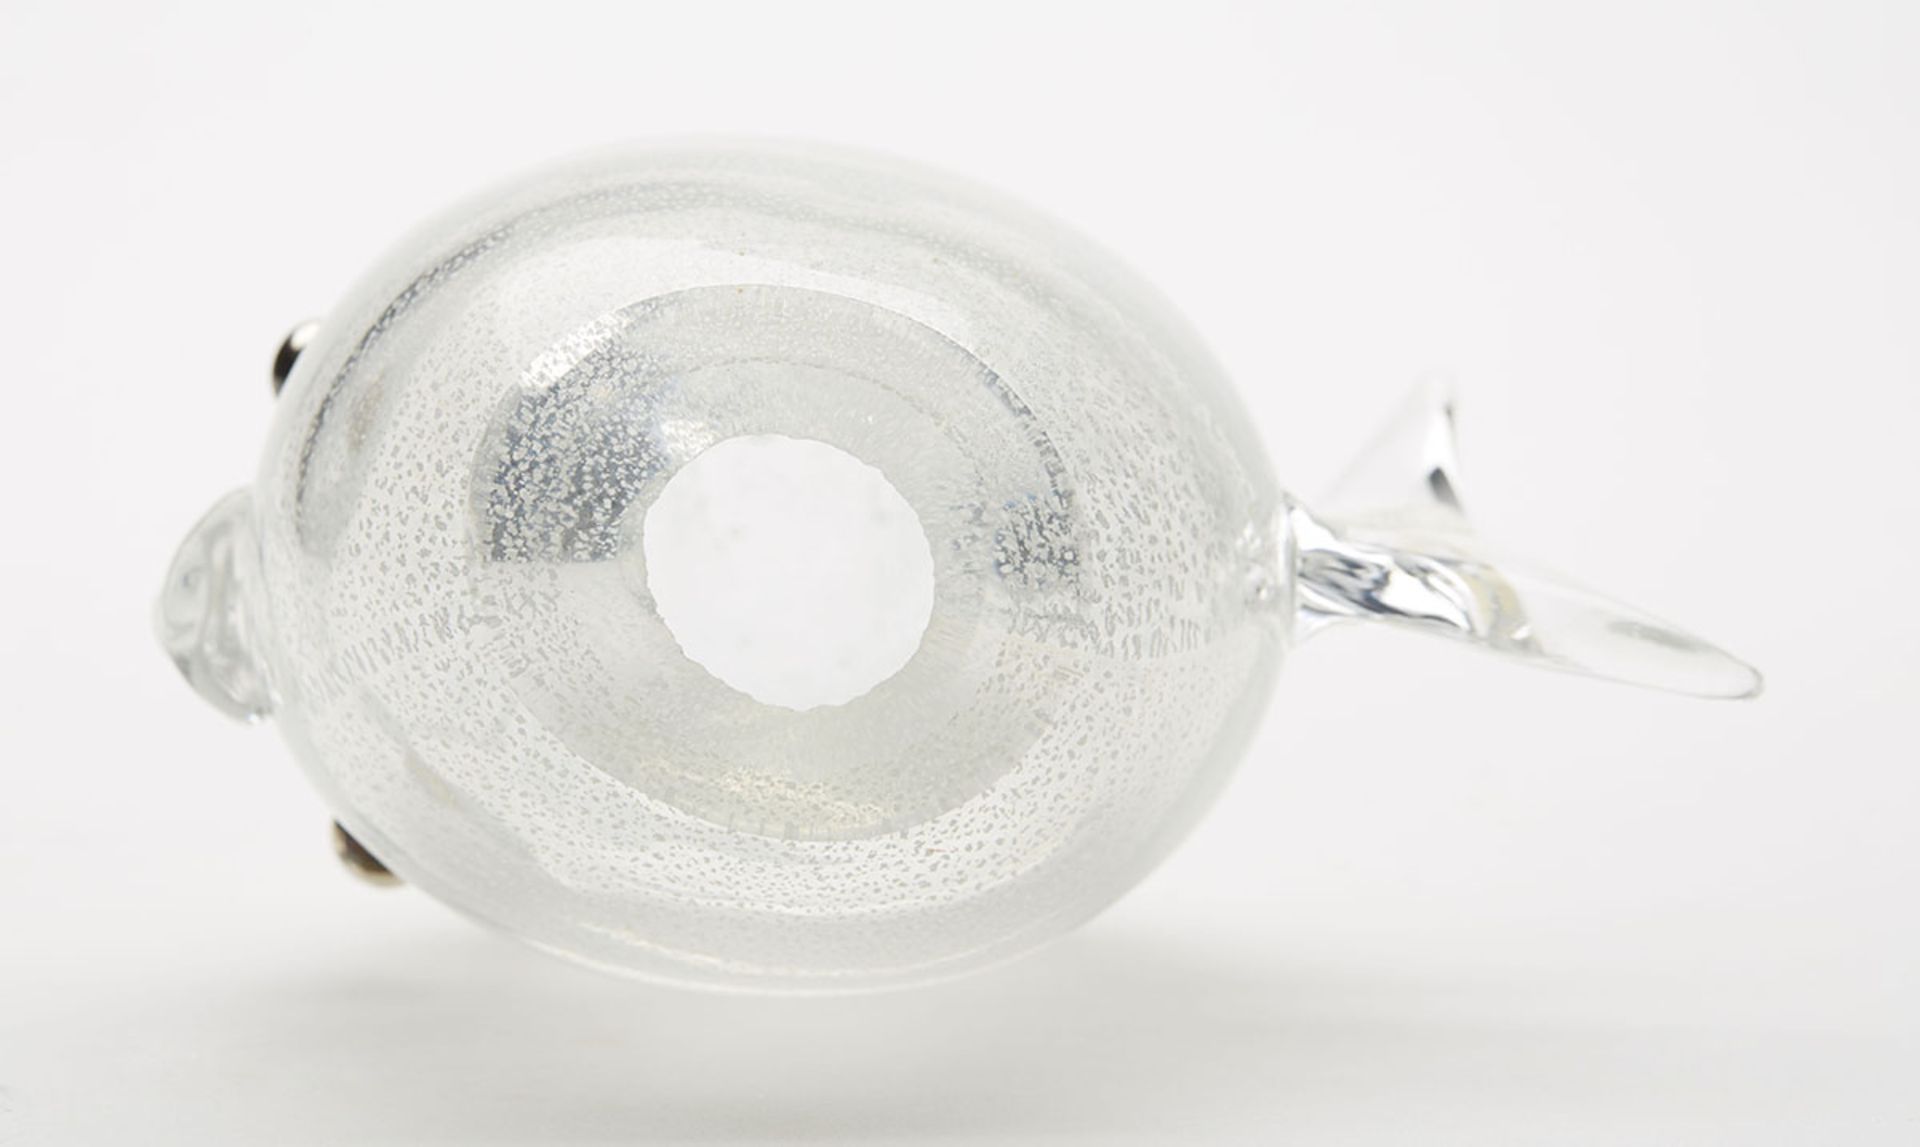 VINTAGE VETRI MURANO FISH WITH SILVER INCLUSIONS 20TH C. - Image 8 of 8